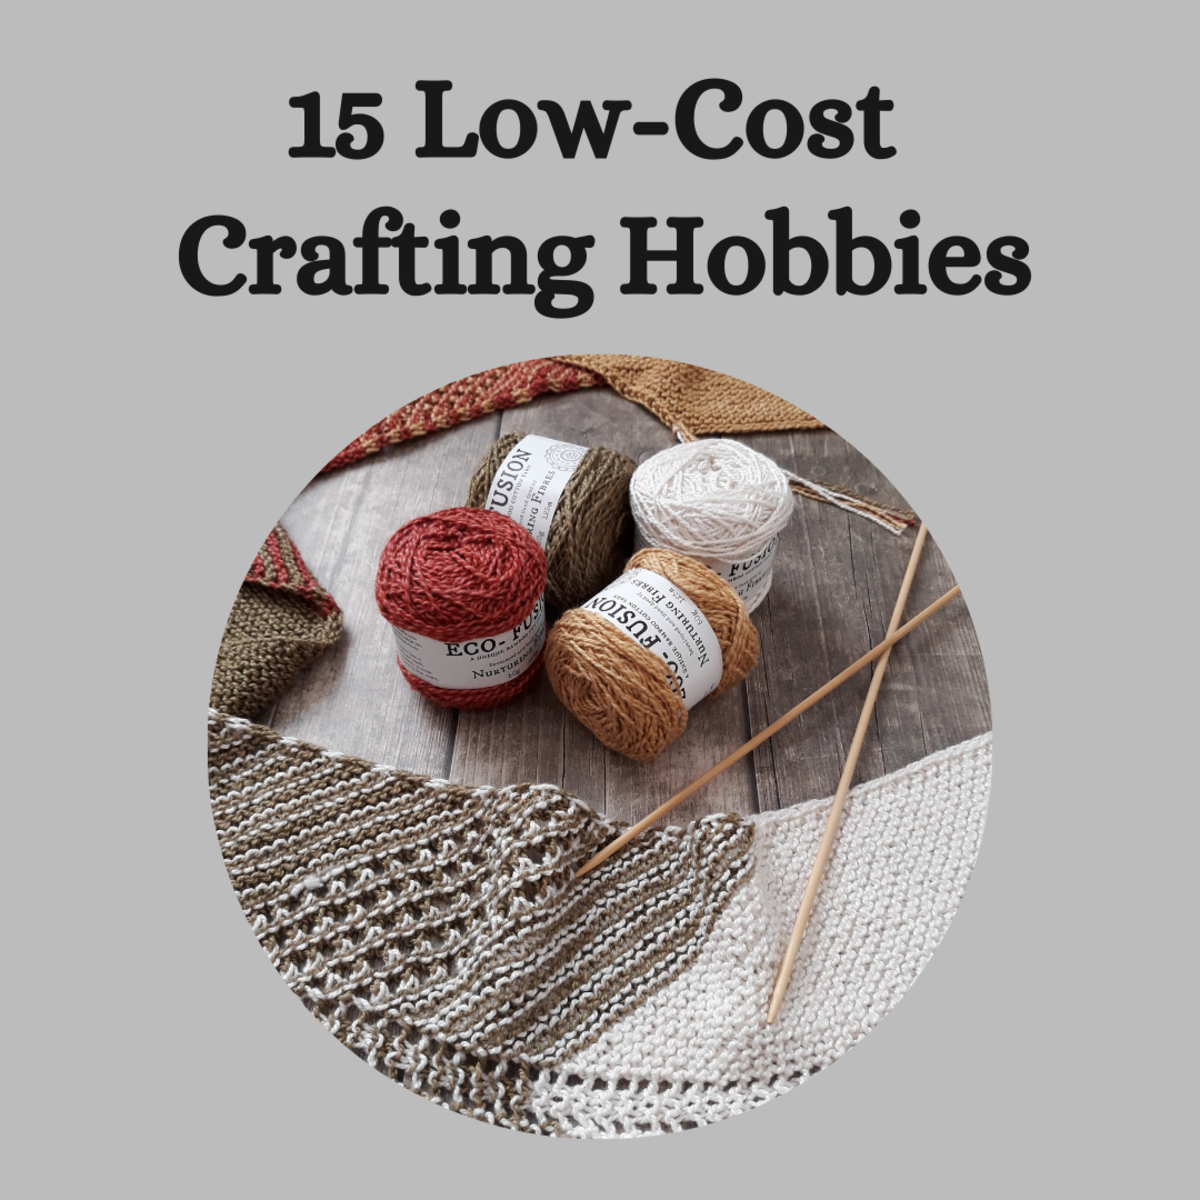 Here are some excellent crafting hobbies to explore if you don't want to spend too much!